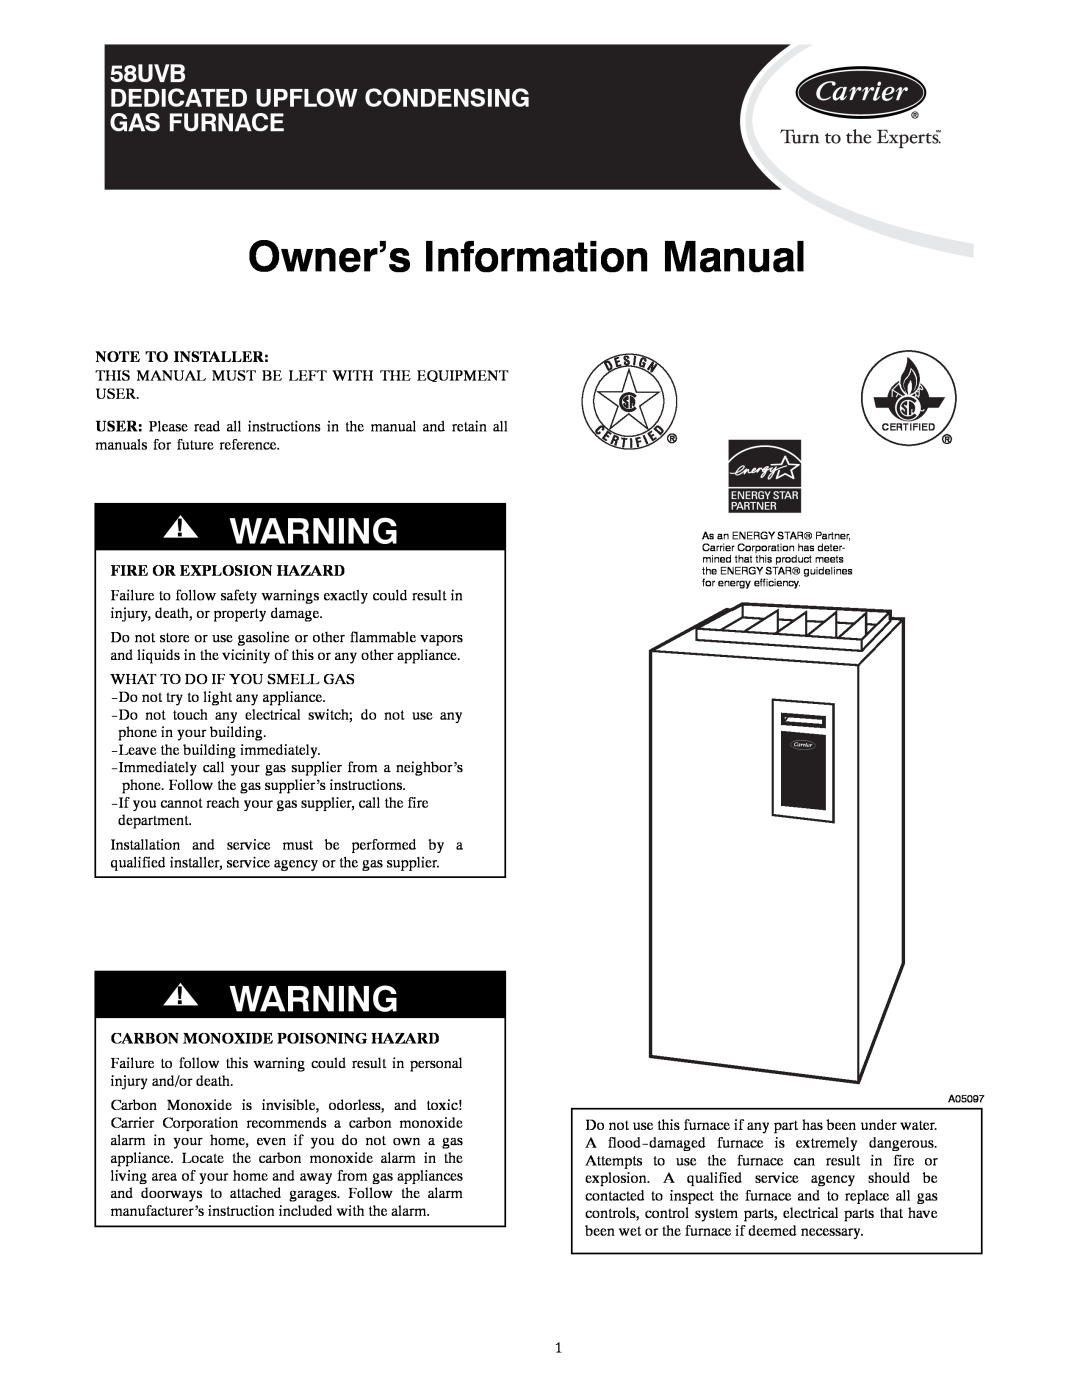 Carrier manual Owner’s Information Manual, 58UVB DEDICATED UPFLOW CONDENSING GAS FURNACE, Note To Installer 